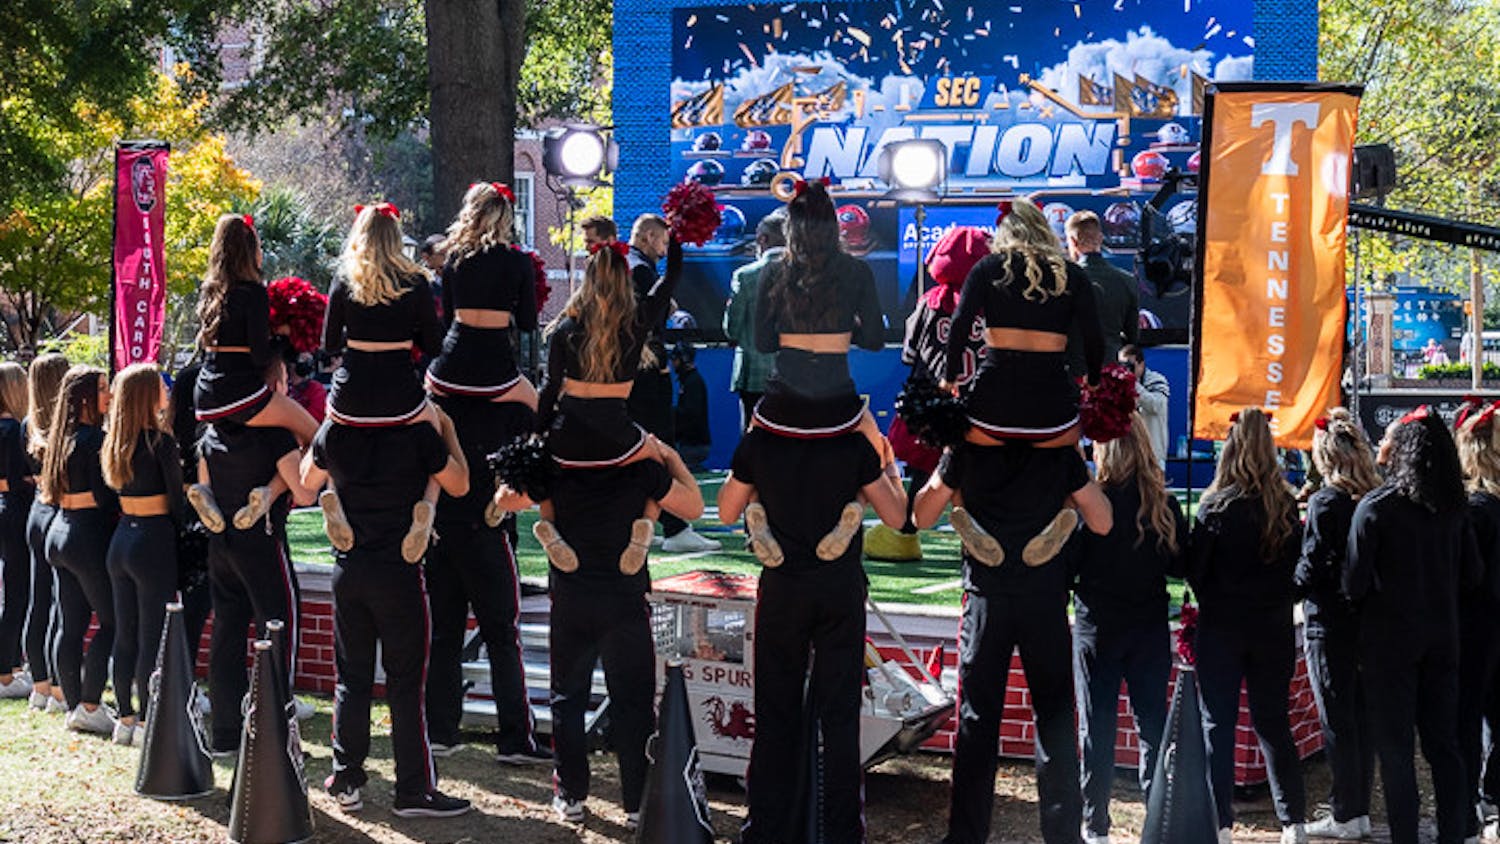 The USC cheer team poses in front of the SEC Nation stage on Nov. 19, 2022. The show covers teams from across the SEC and interviews key coaches and players.